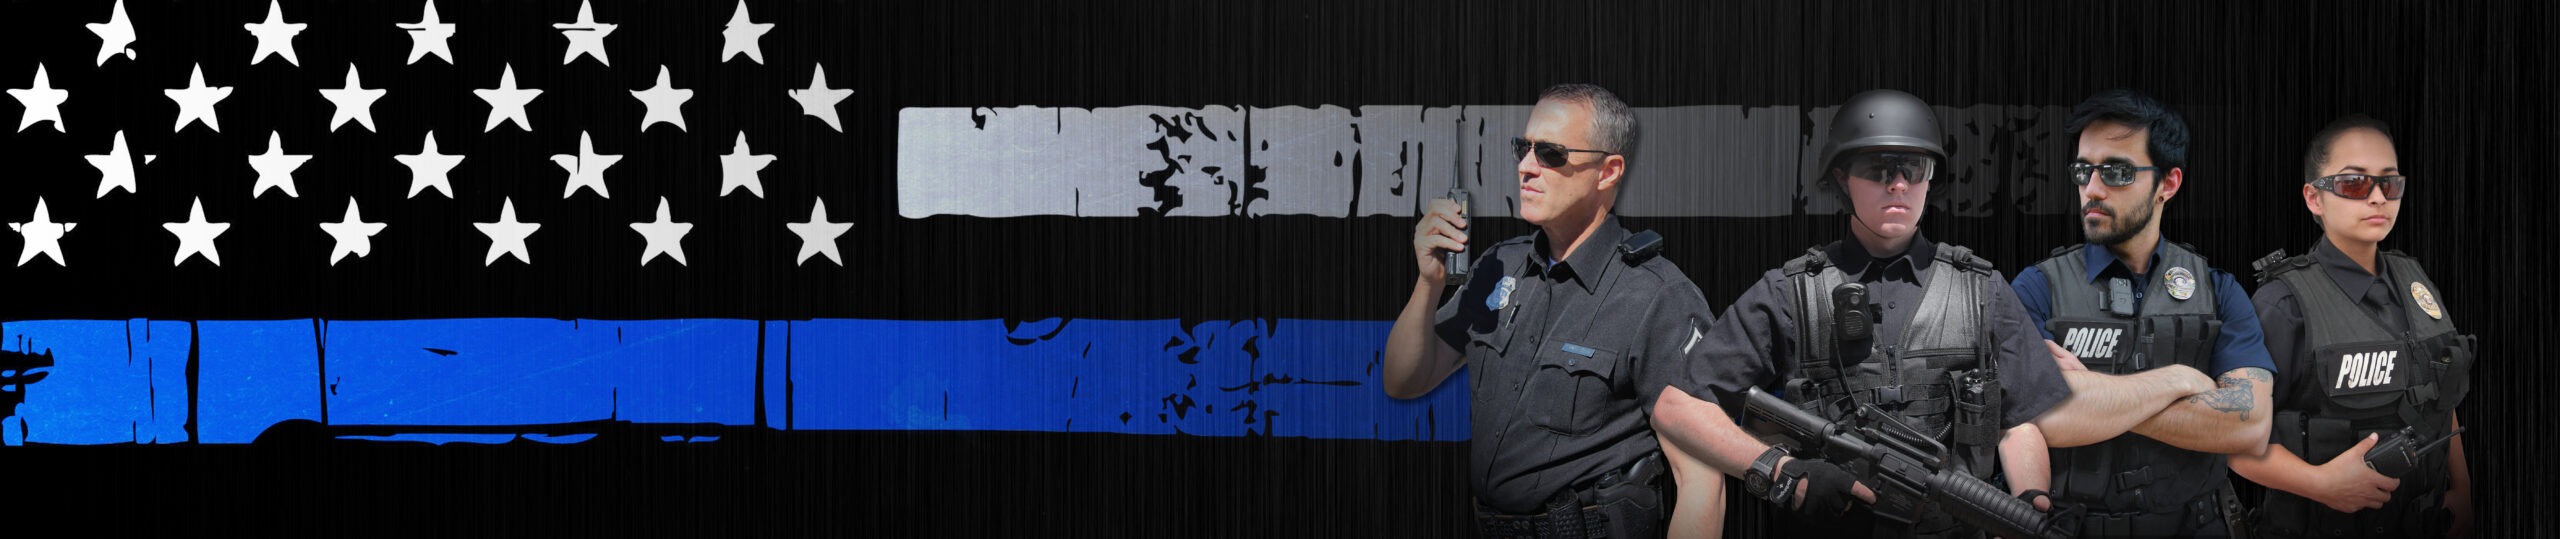 WOLFCOM body cameras banner showing different ways to wear body cameras